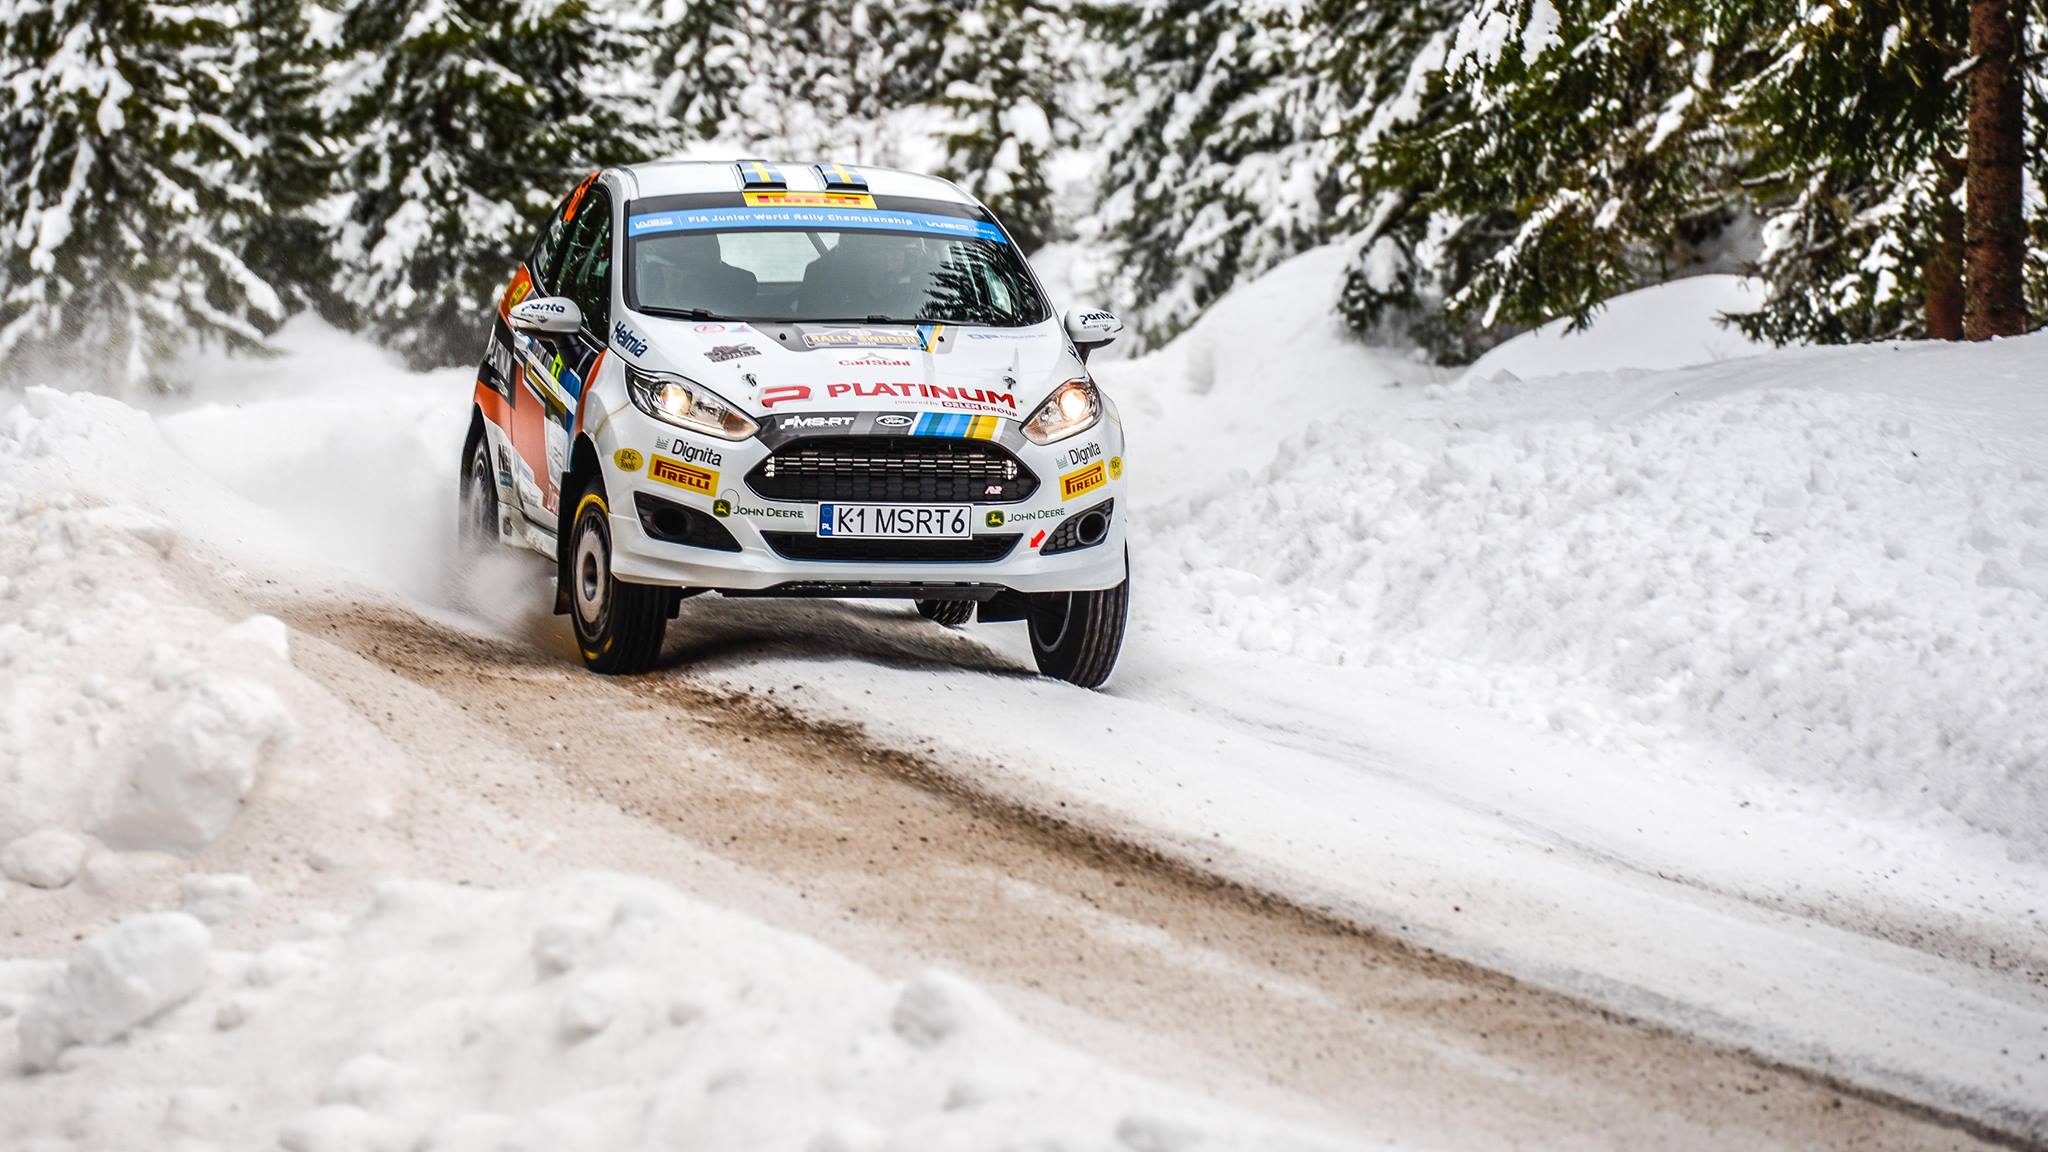 Rally Sweden 2018